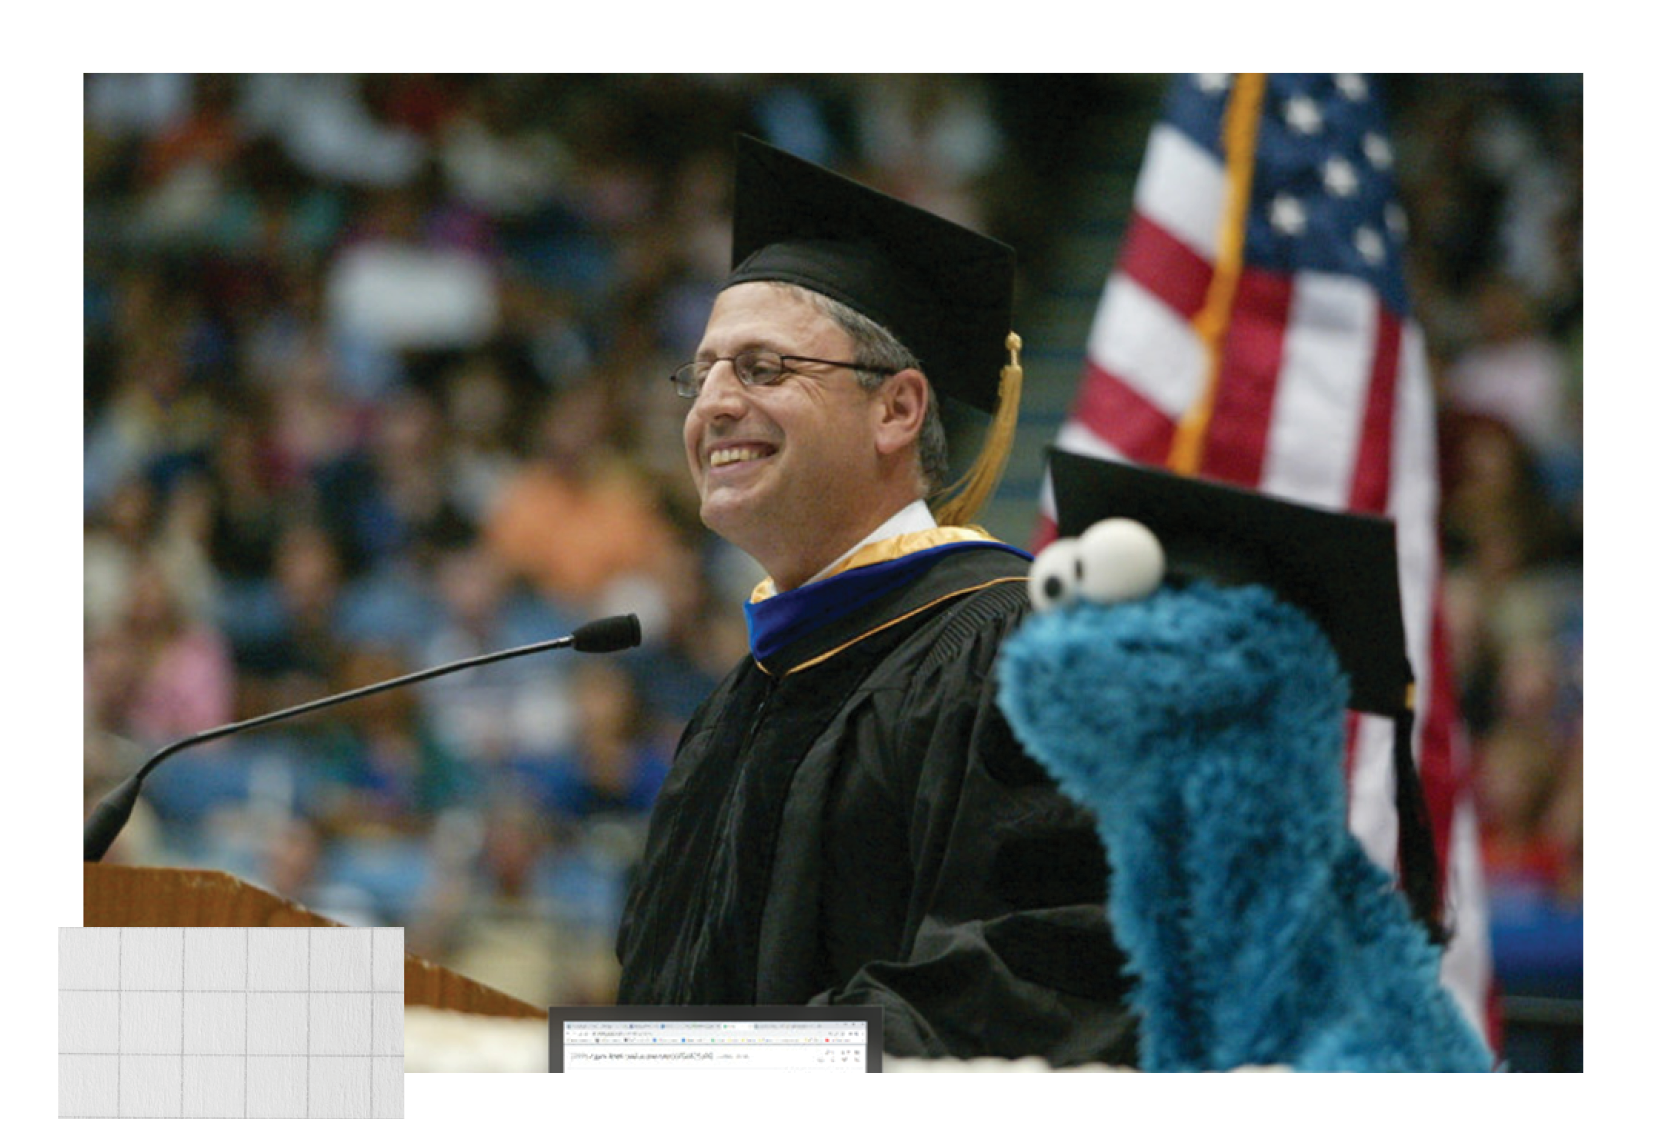 2005 UCLA College Commencement speaker, Gary Knell '75 with Sesame Street's Cookie Monster on stage for a special appearance before the Pauley Pavilion crowd.